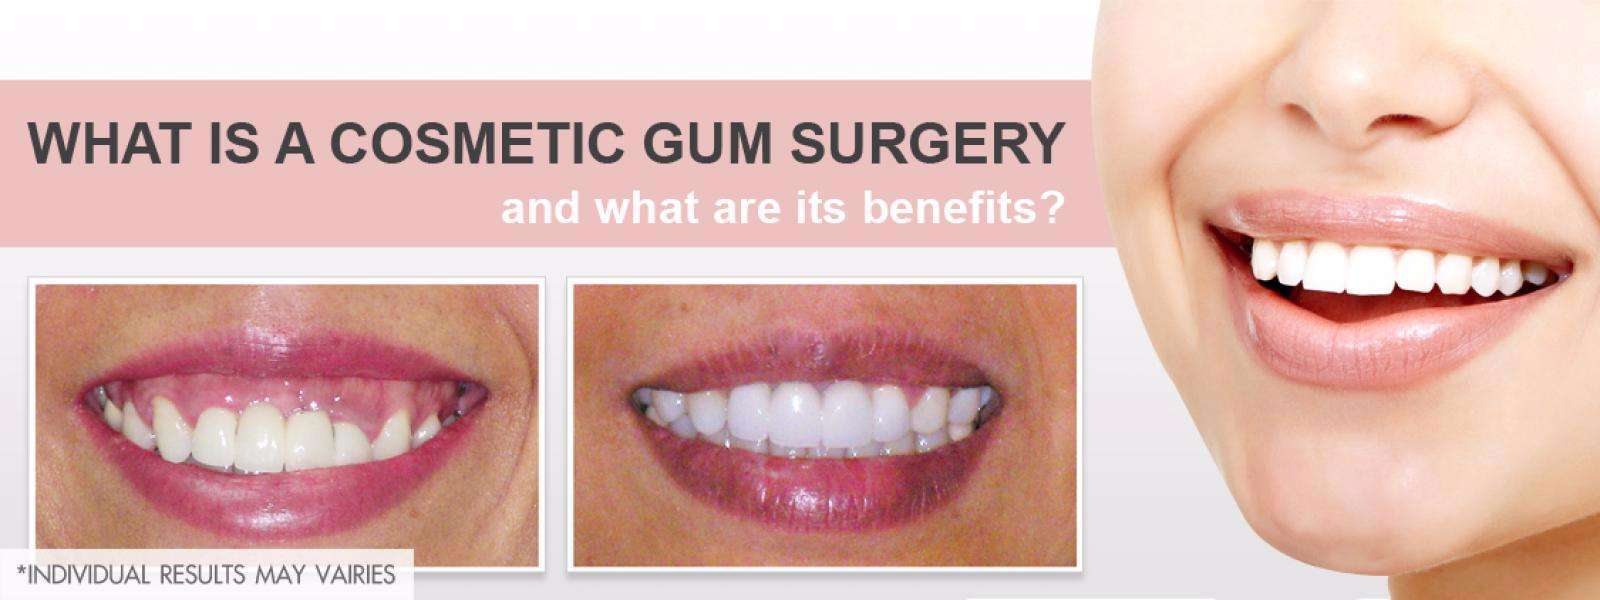 What is a cosmetic gum surgery and what are its benefits?